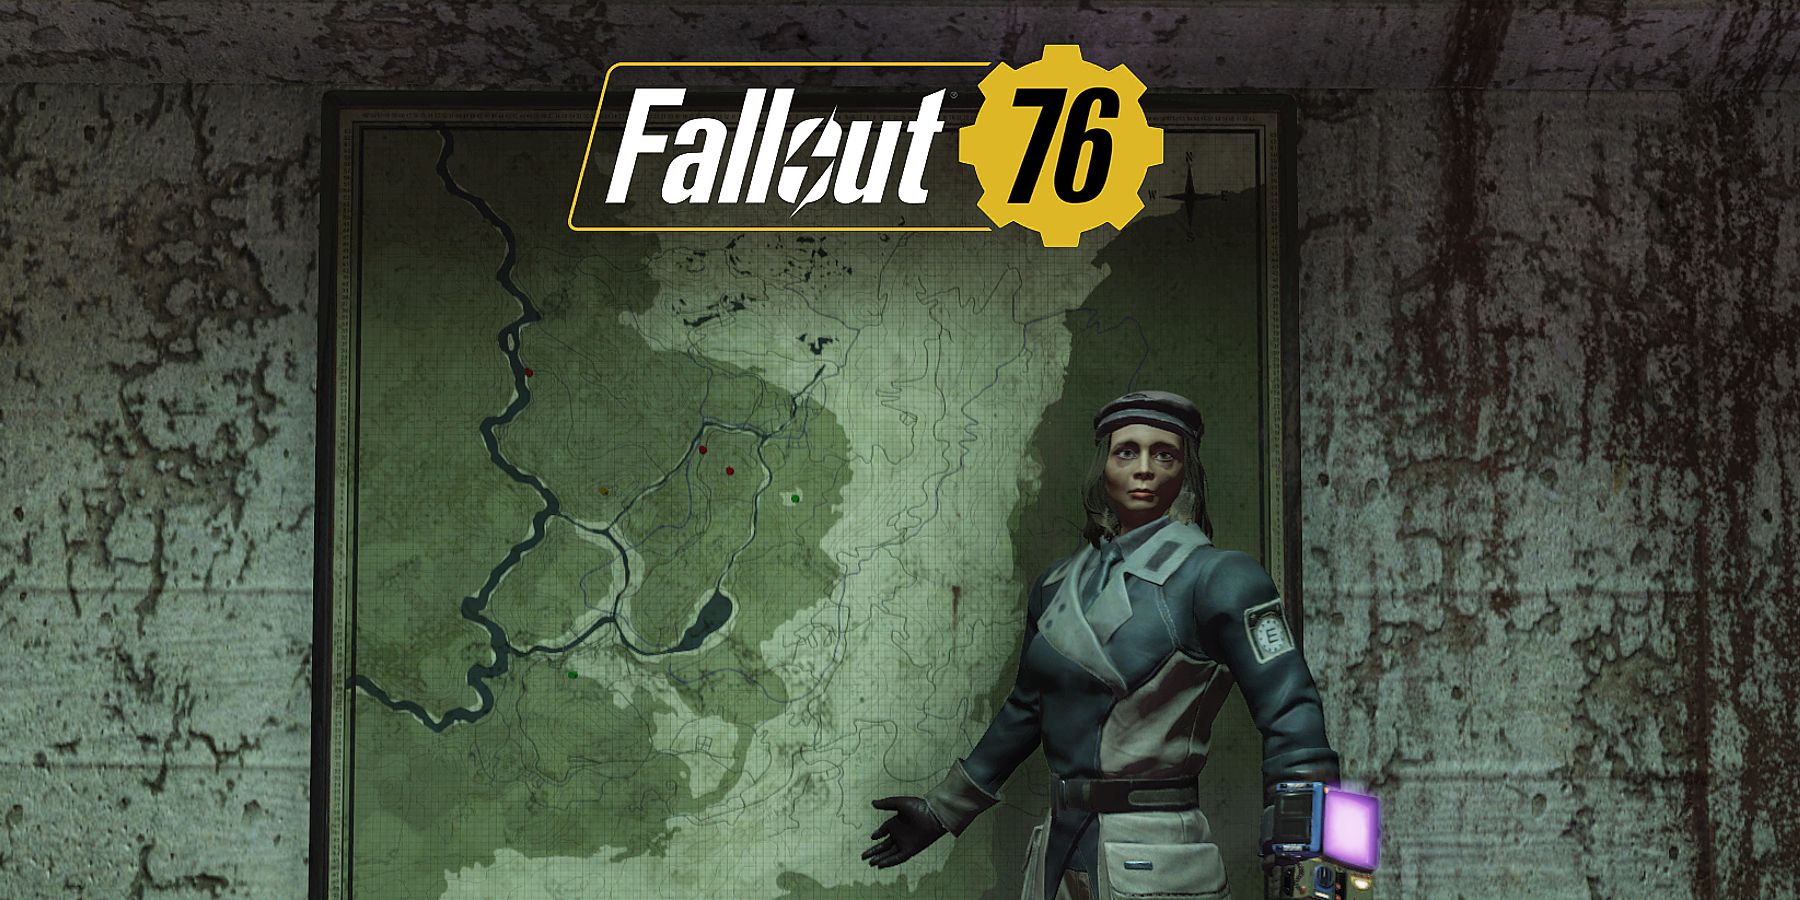 Fallout 76 Appalachia Map Player Posing in Enclave Officer Outfit